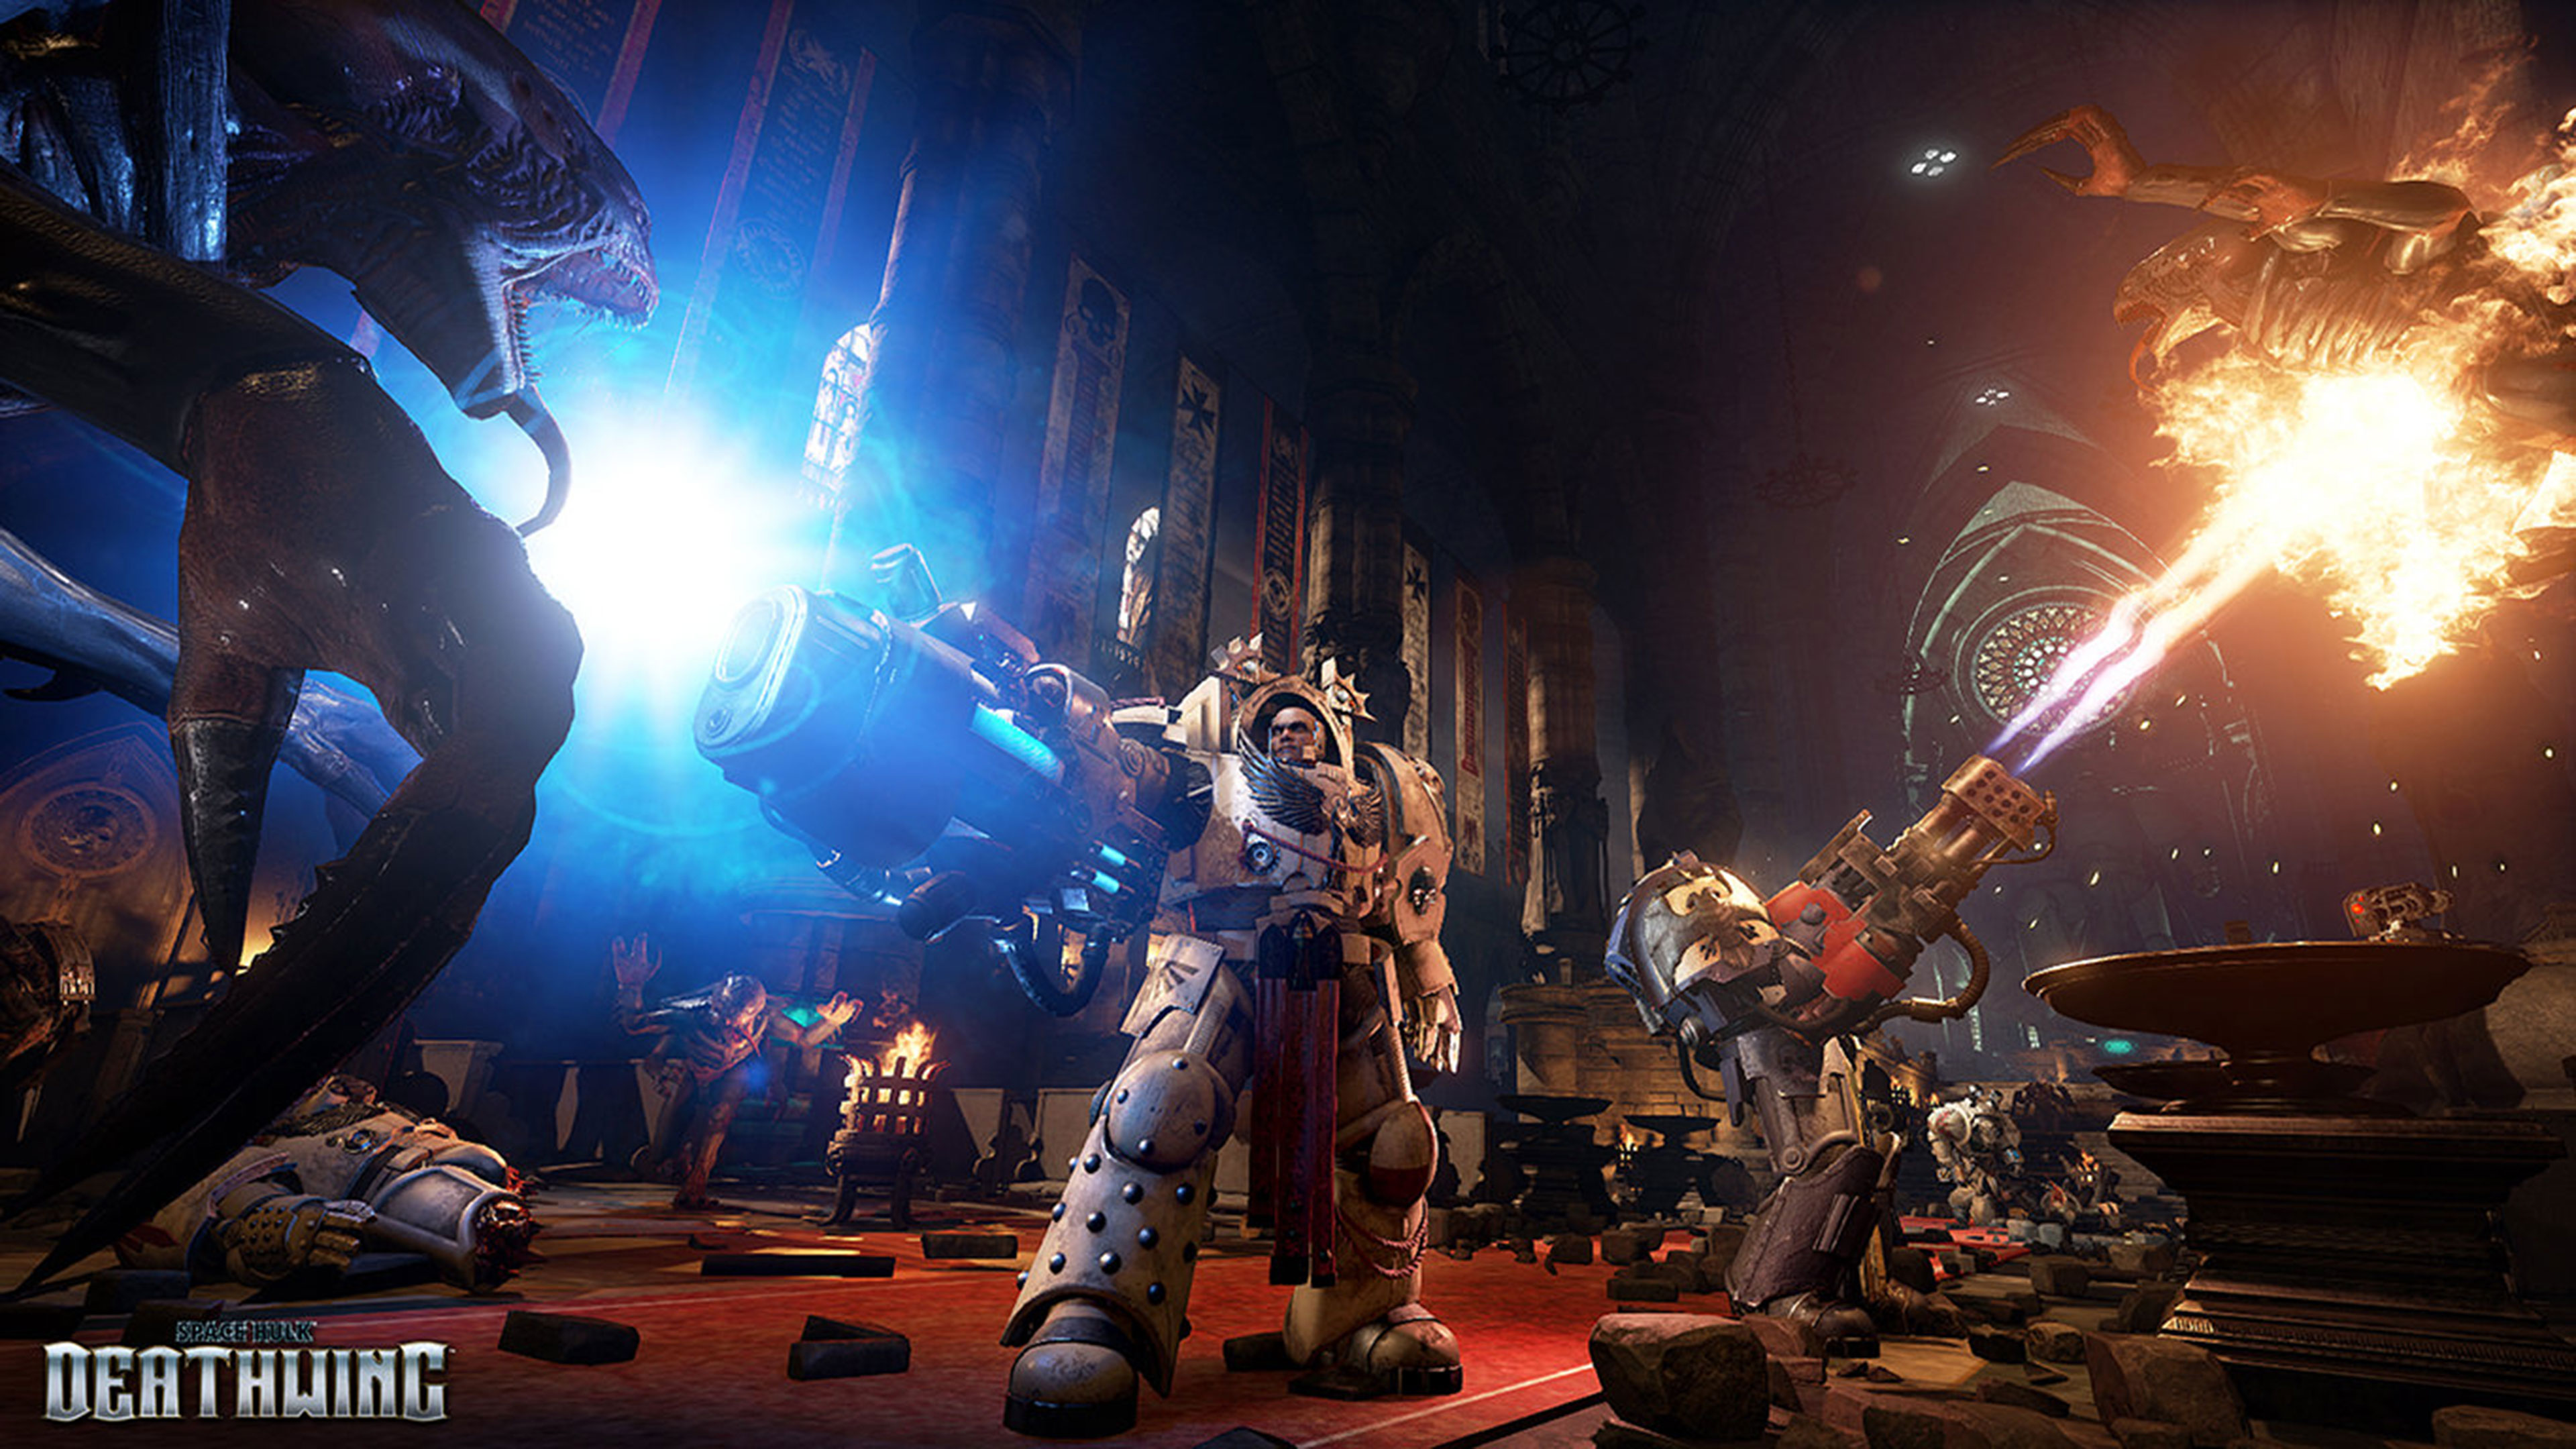 Space Hulk Deathwing Wallpapers In Ultra Hd 4k Gameranx Images, Photos, Reviews